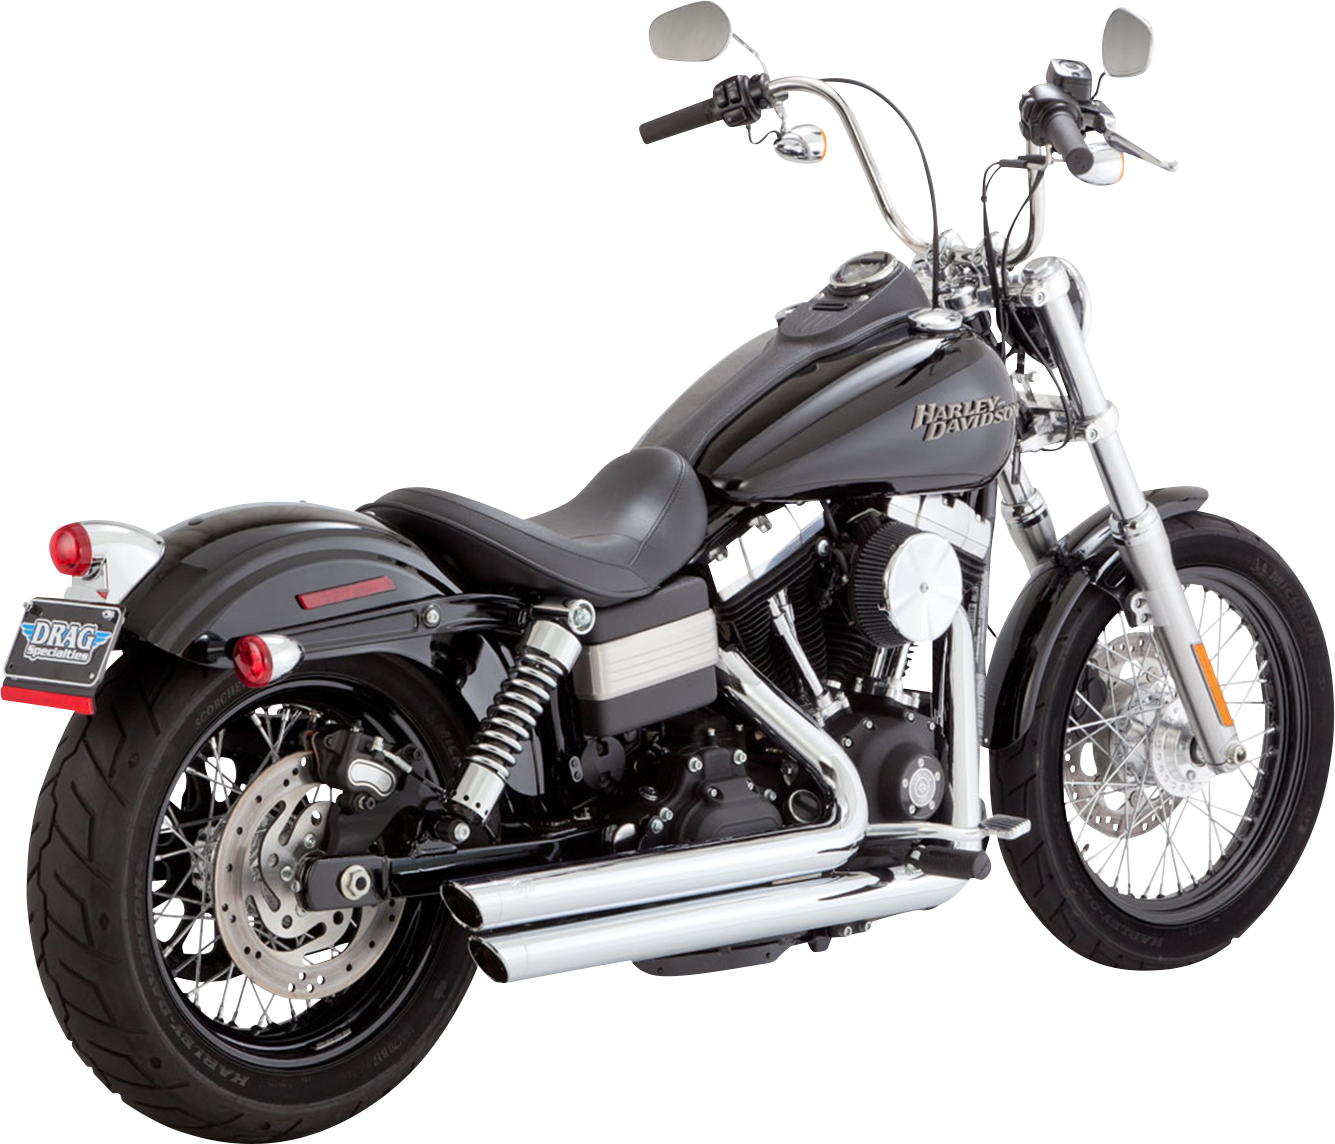 Vance & Hines Chrome Big Shots Staggered Exhaust System 2006-2017 Harley Dyna